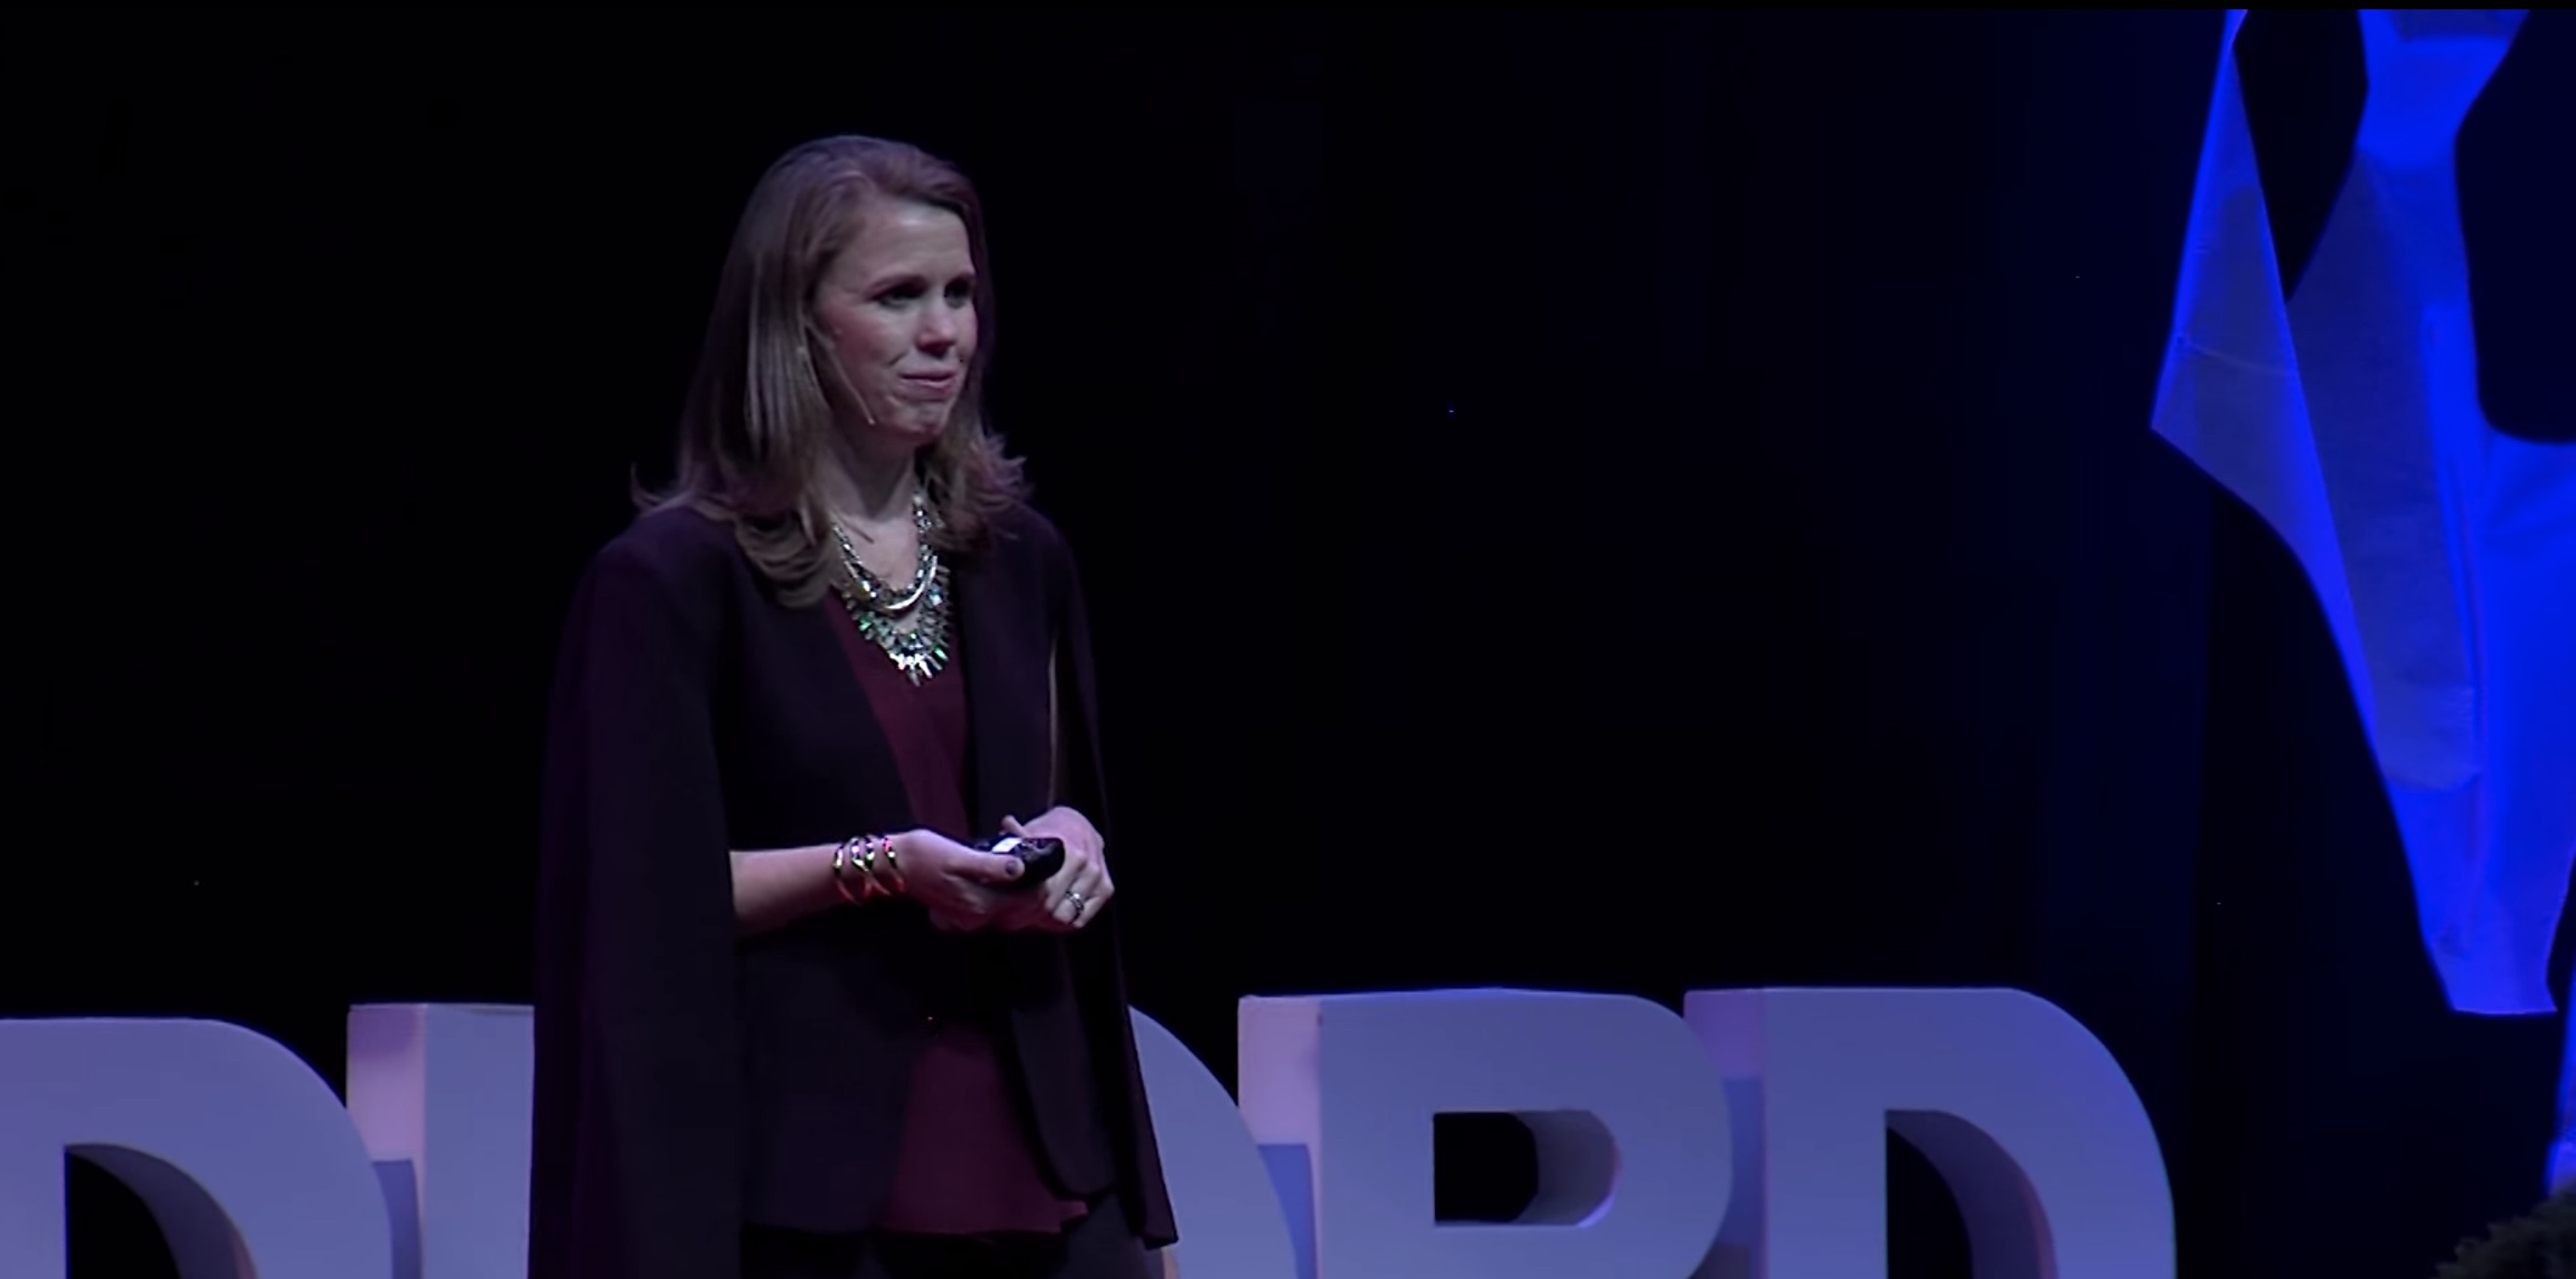 CEO and Founder of Global Autism Project, Molly Ola Pinney, speak at a TEDx event. Screenshot: TEDx Talks / Youtube